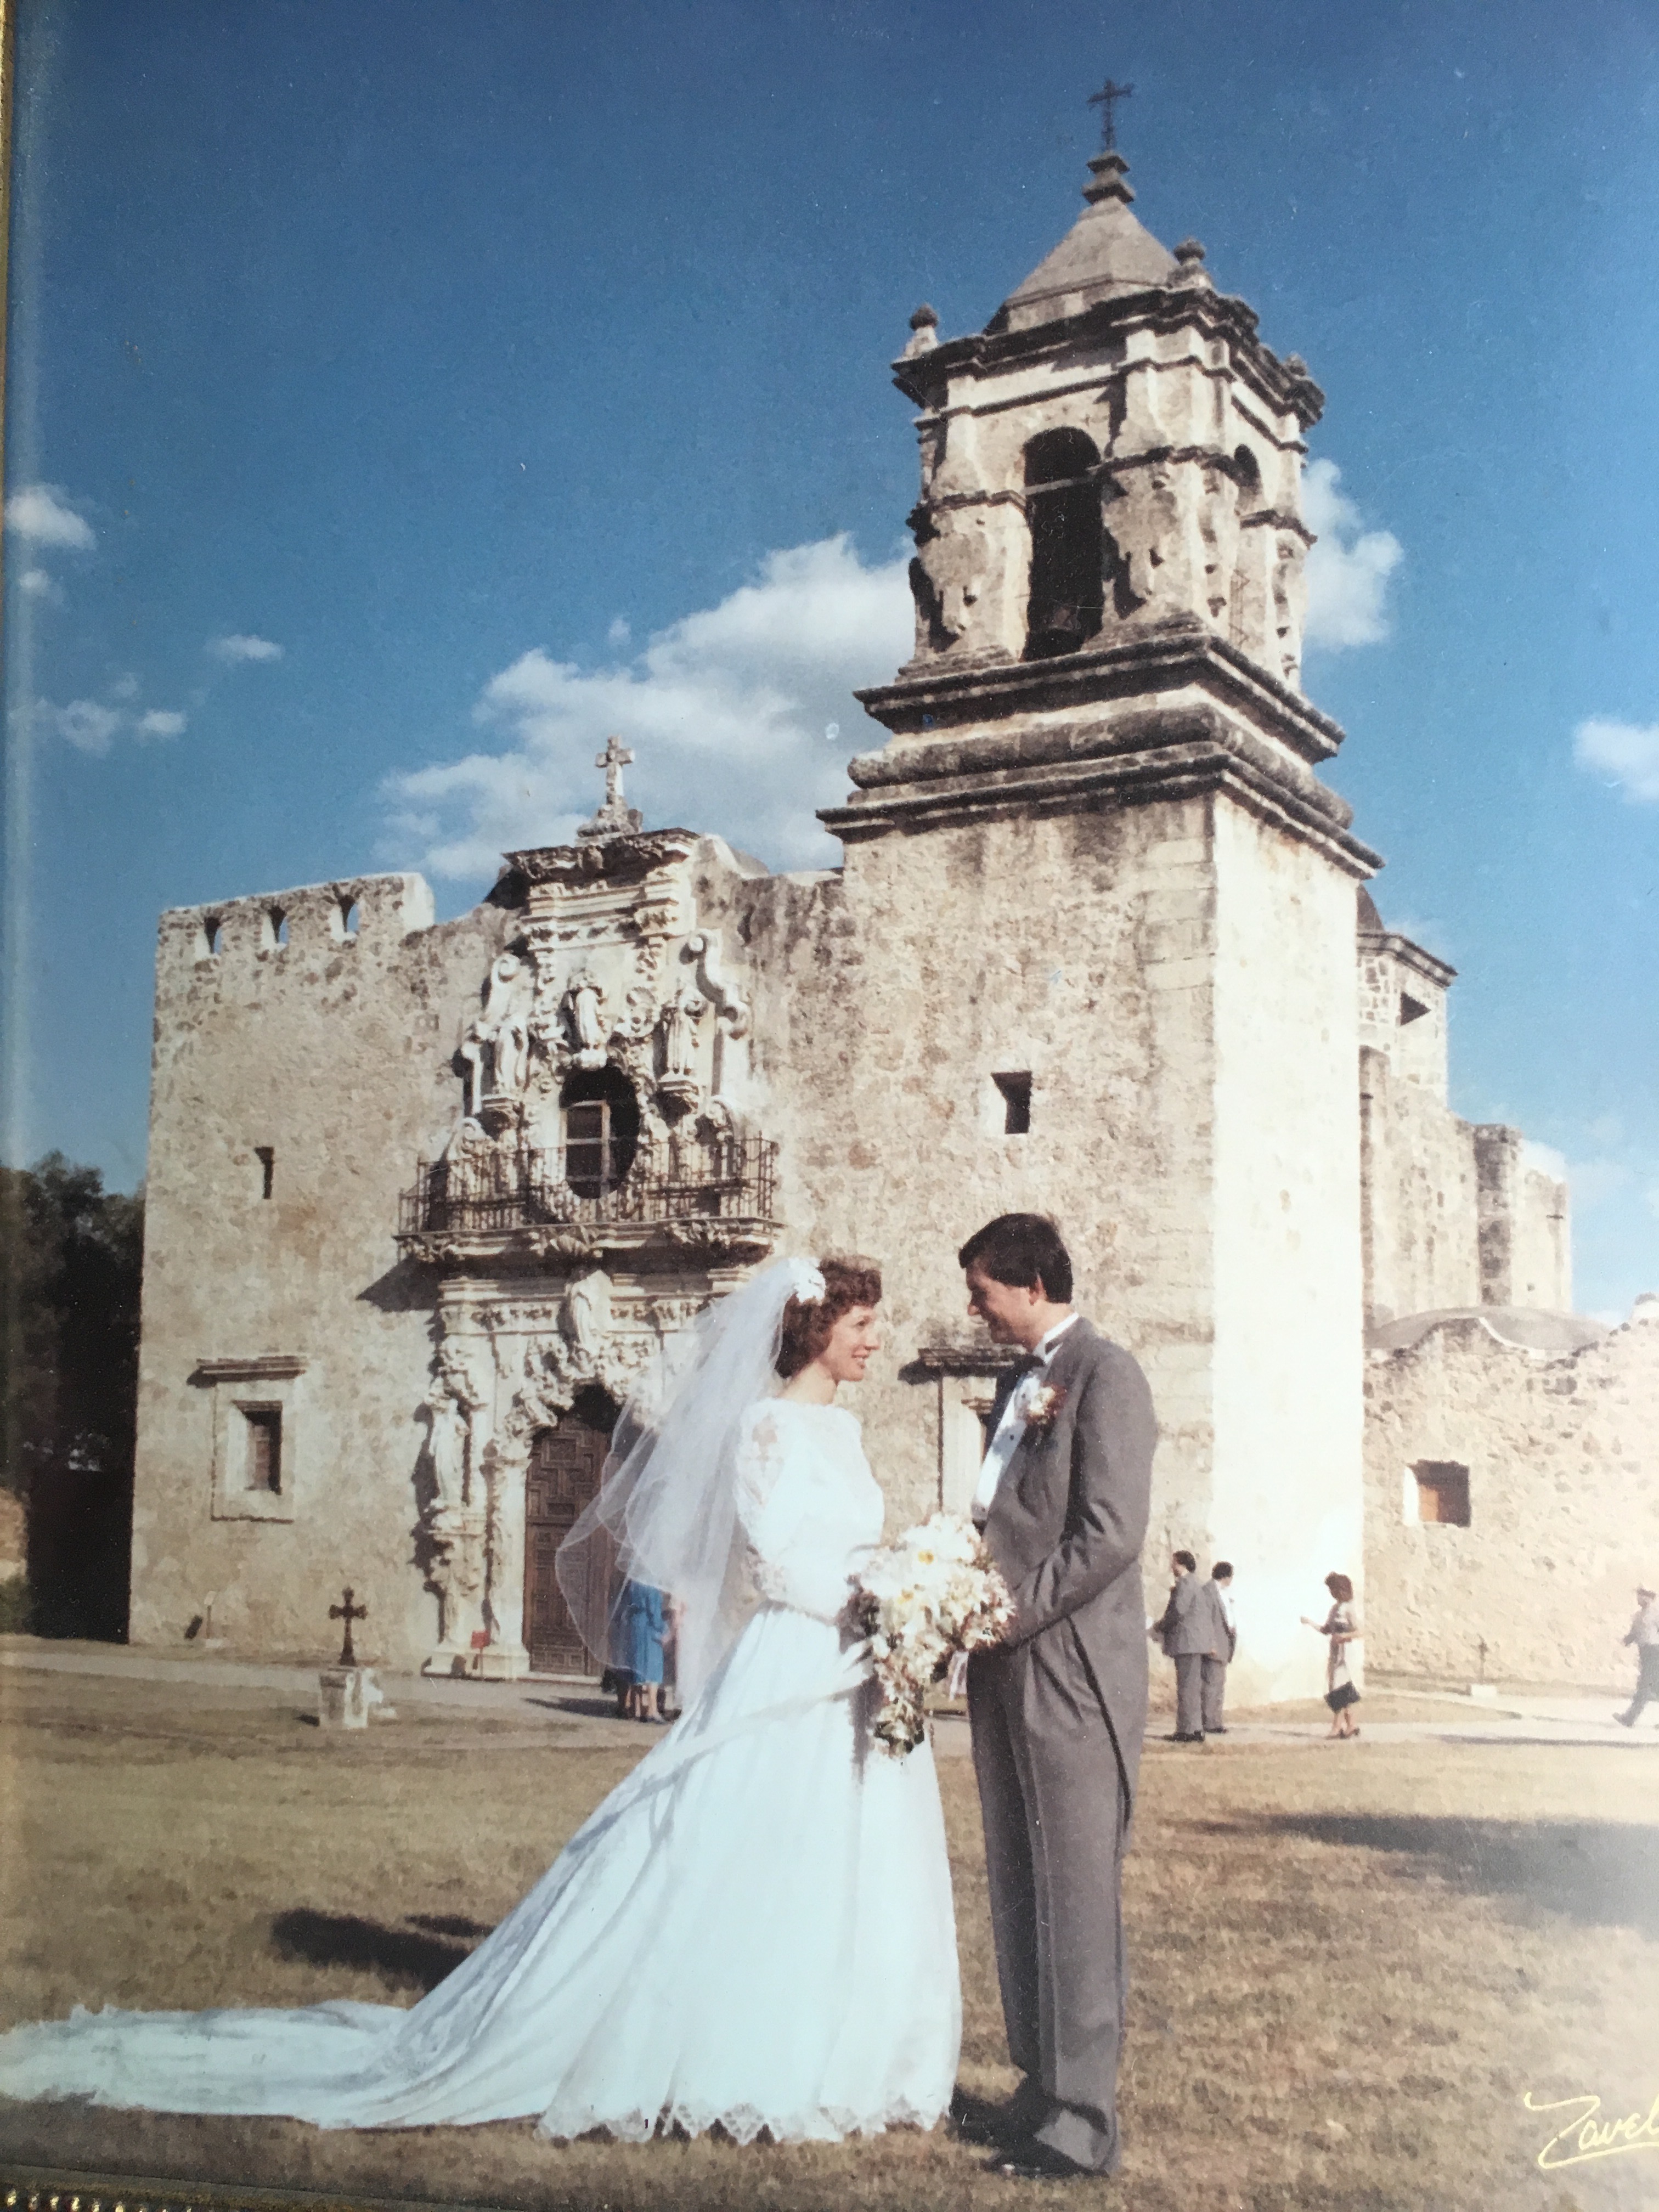 Annette Bernhard Nevins and her husband on their wedding day in front of Mission San José.